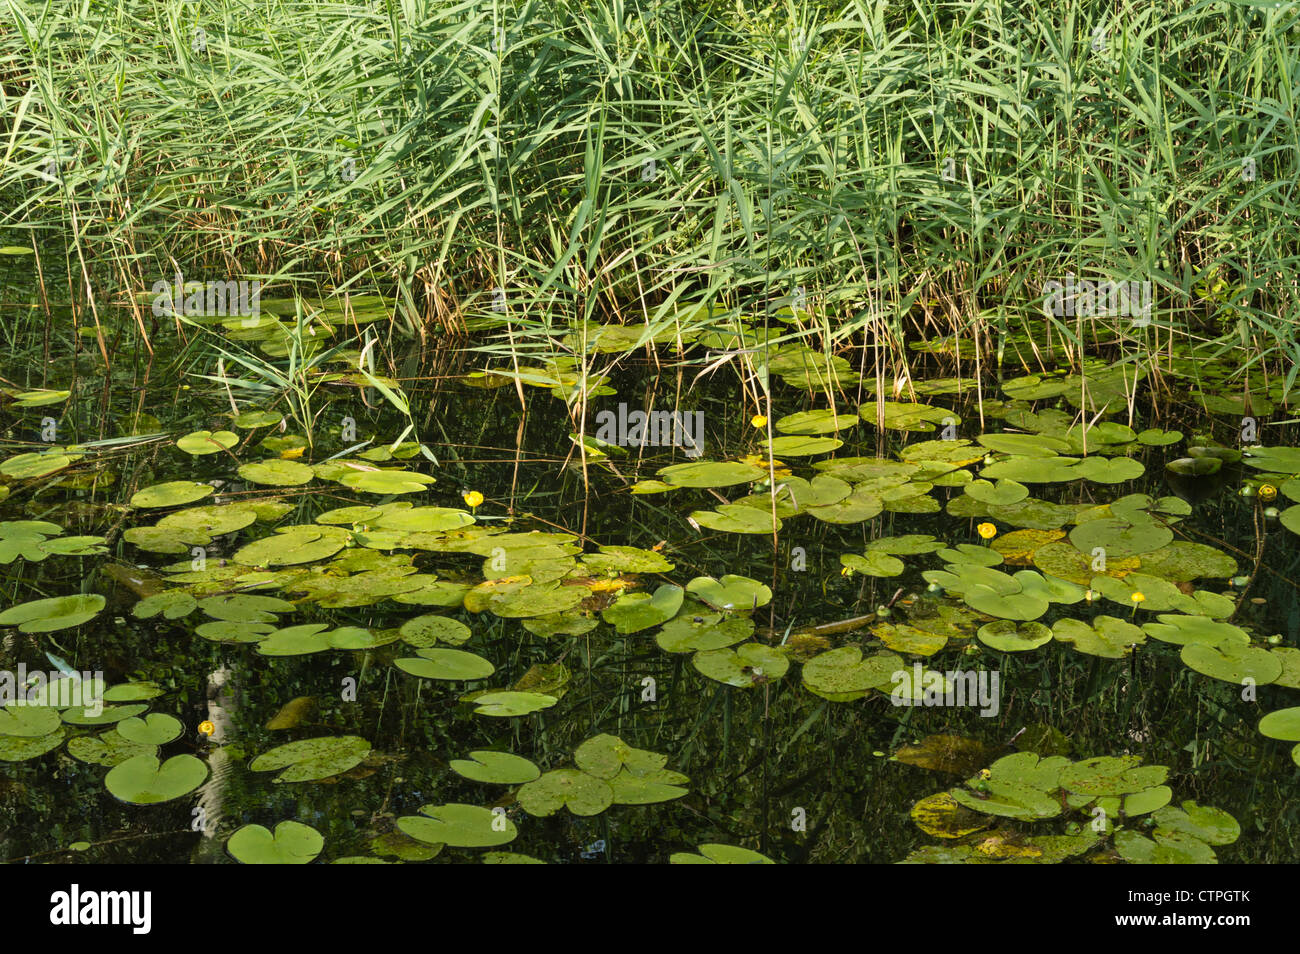 Yellow pond lily (Nuphar lutea) and common reed (Phragmites australis) Stock Photo